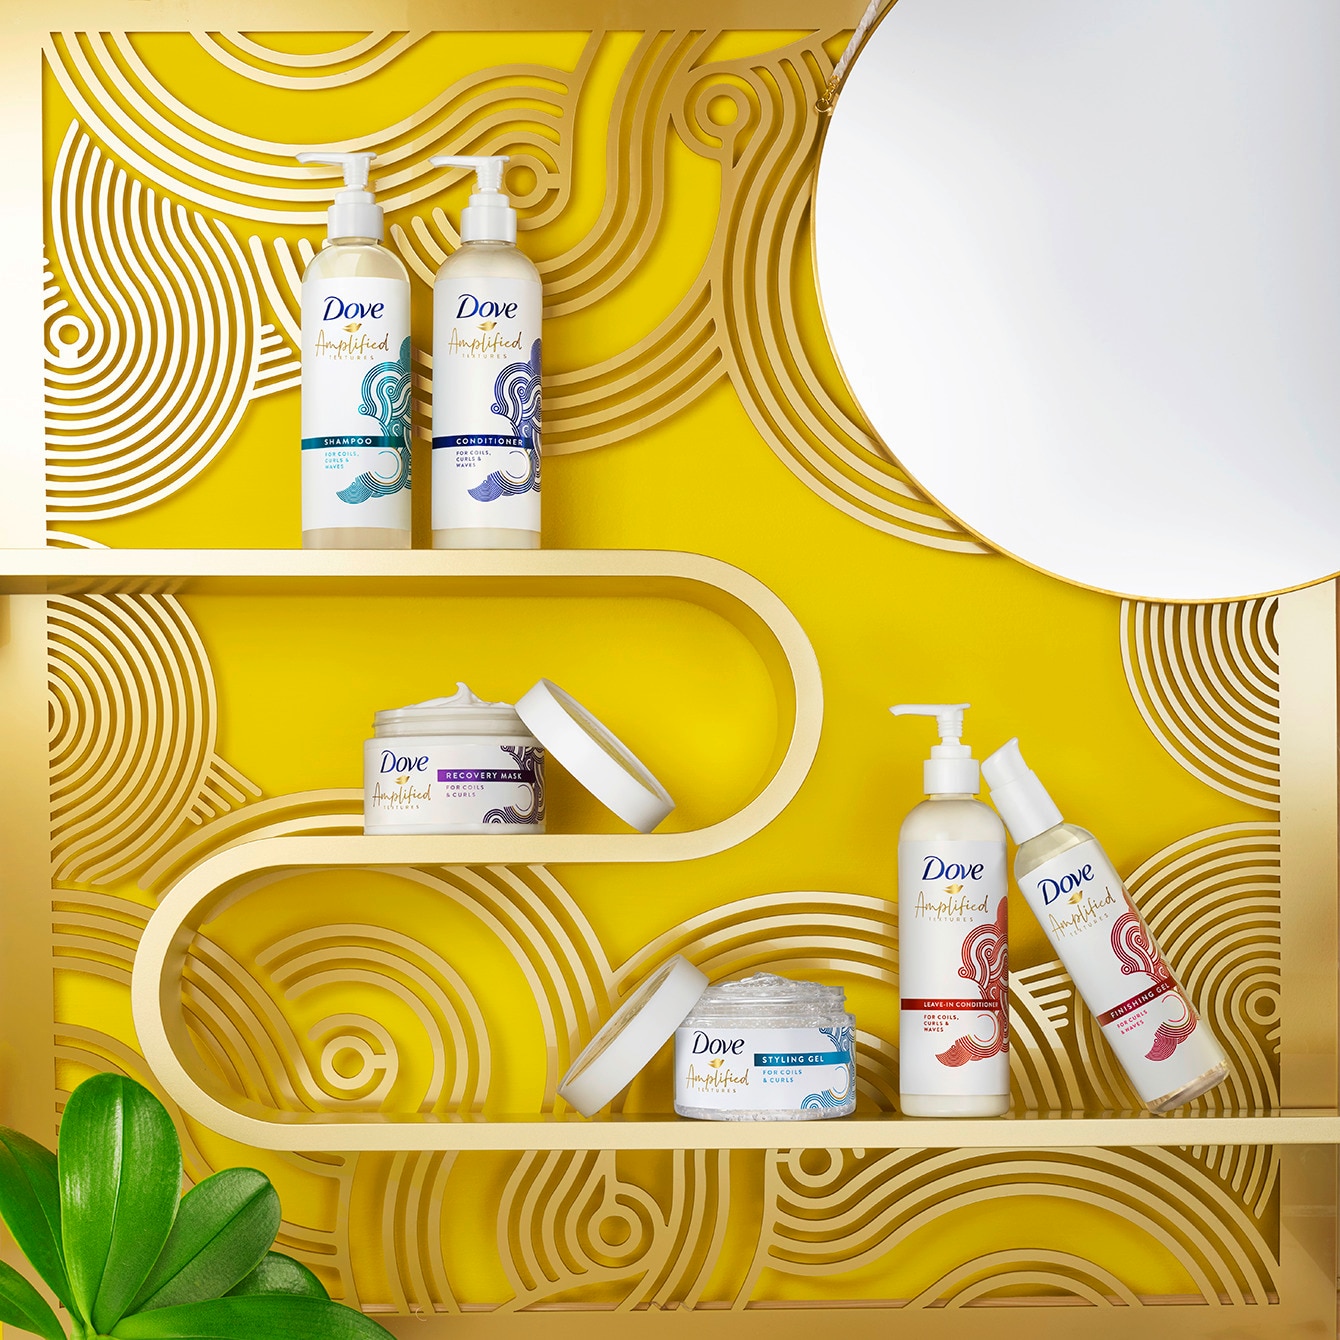 Dove Amplified Textures Products lifestyle shot